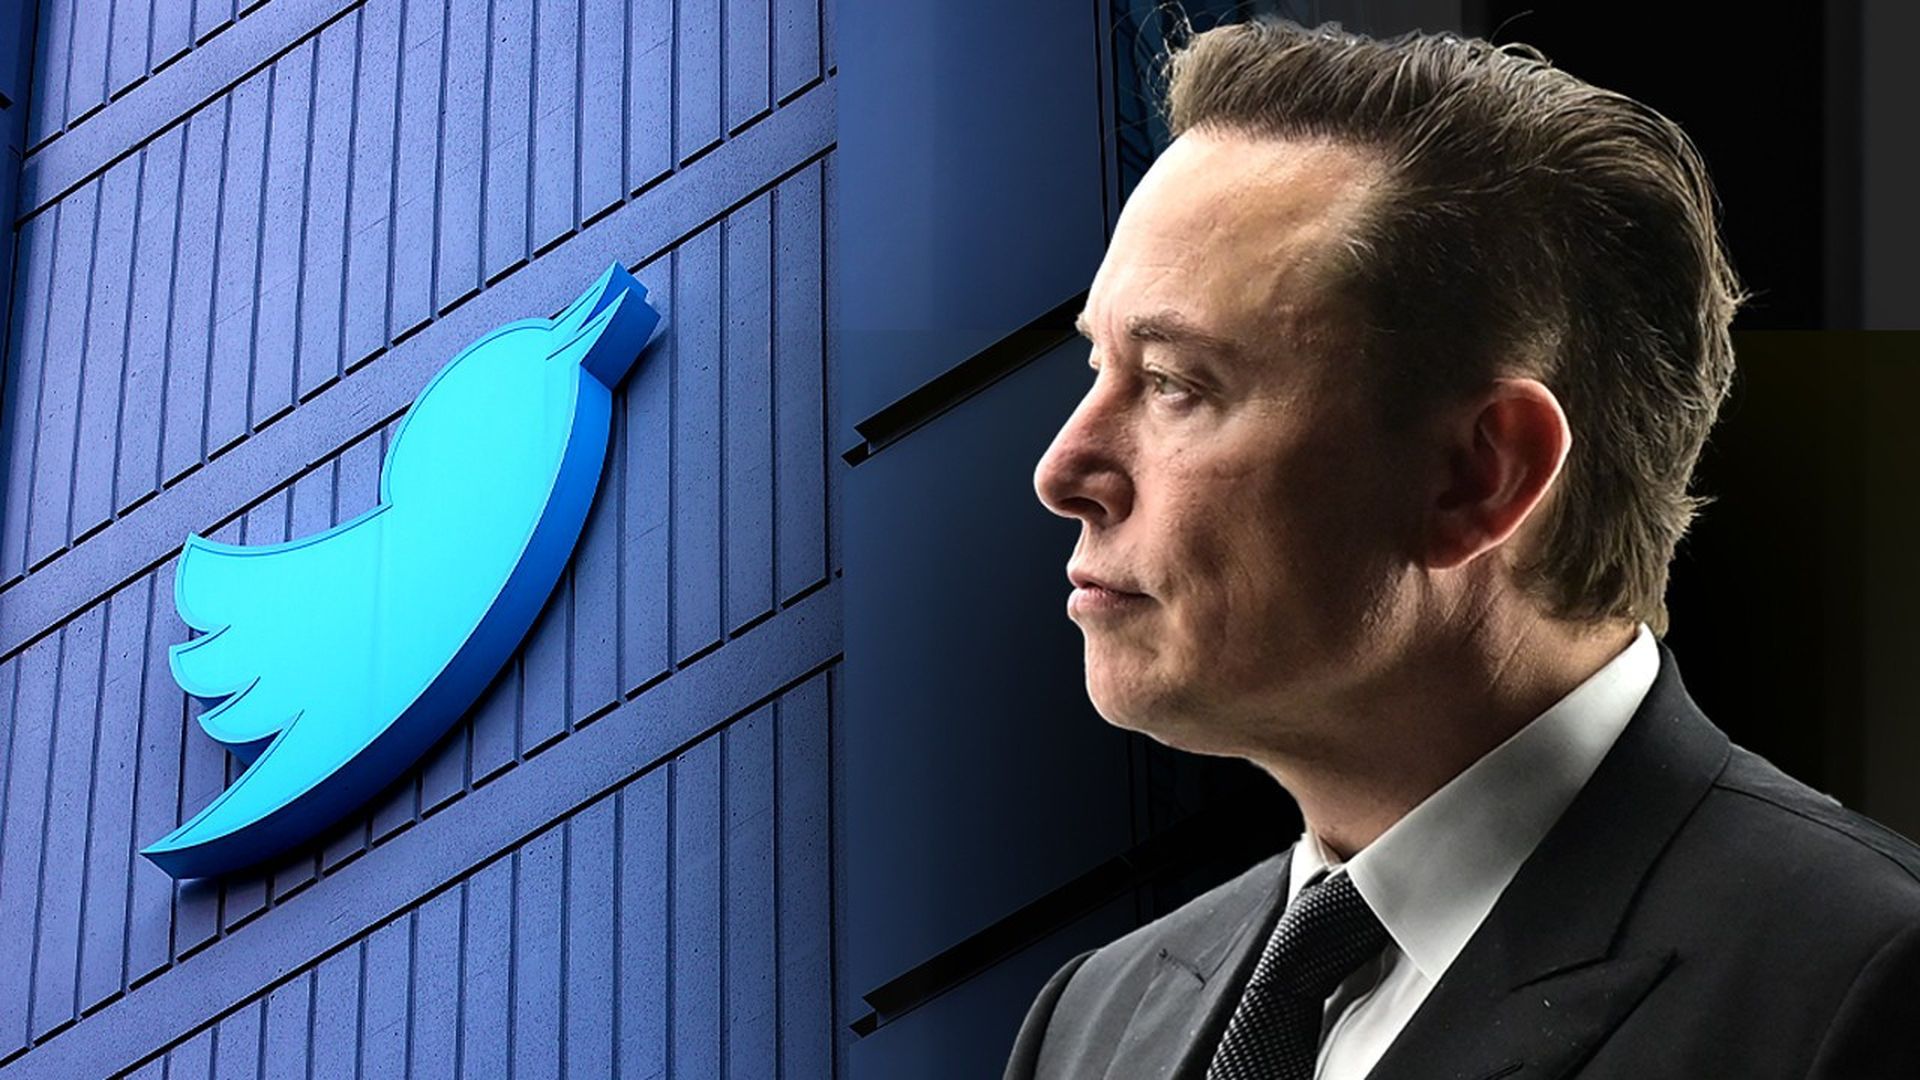 It's official, Elon Musk backs out of Twitter and he might face a lot of legal issues in the near future.